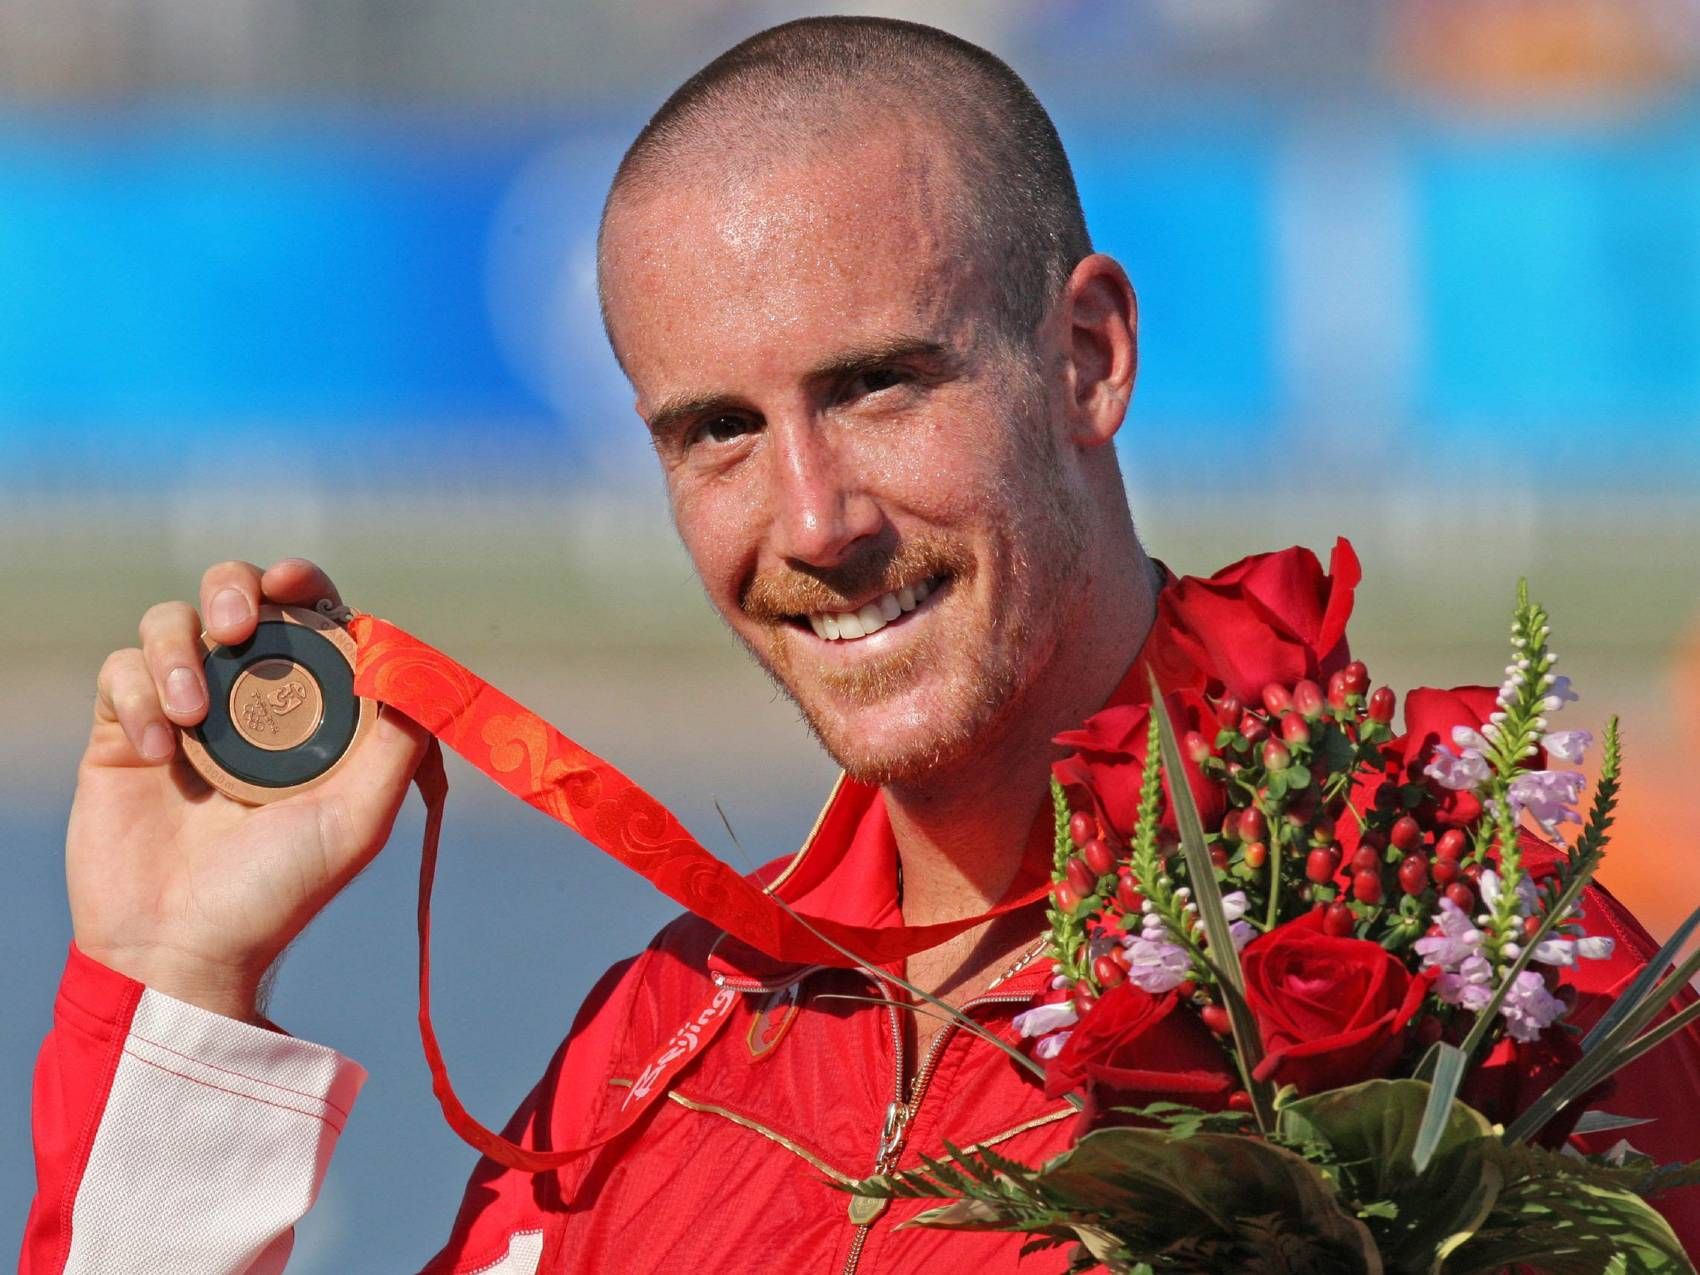 Canadian canoe paddler Thomas Hall holds up his bronze medal in the men's C-1 1000 meter race during the Olympic Games in Beijing on Aug. 22, 2008.